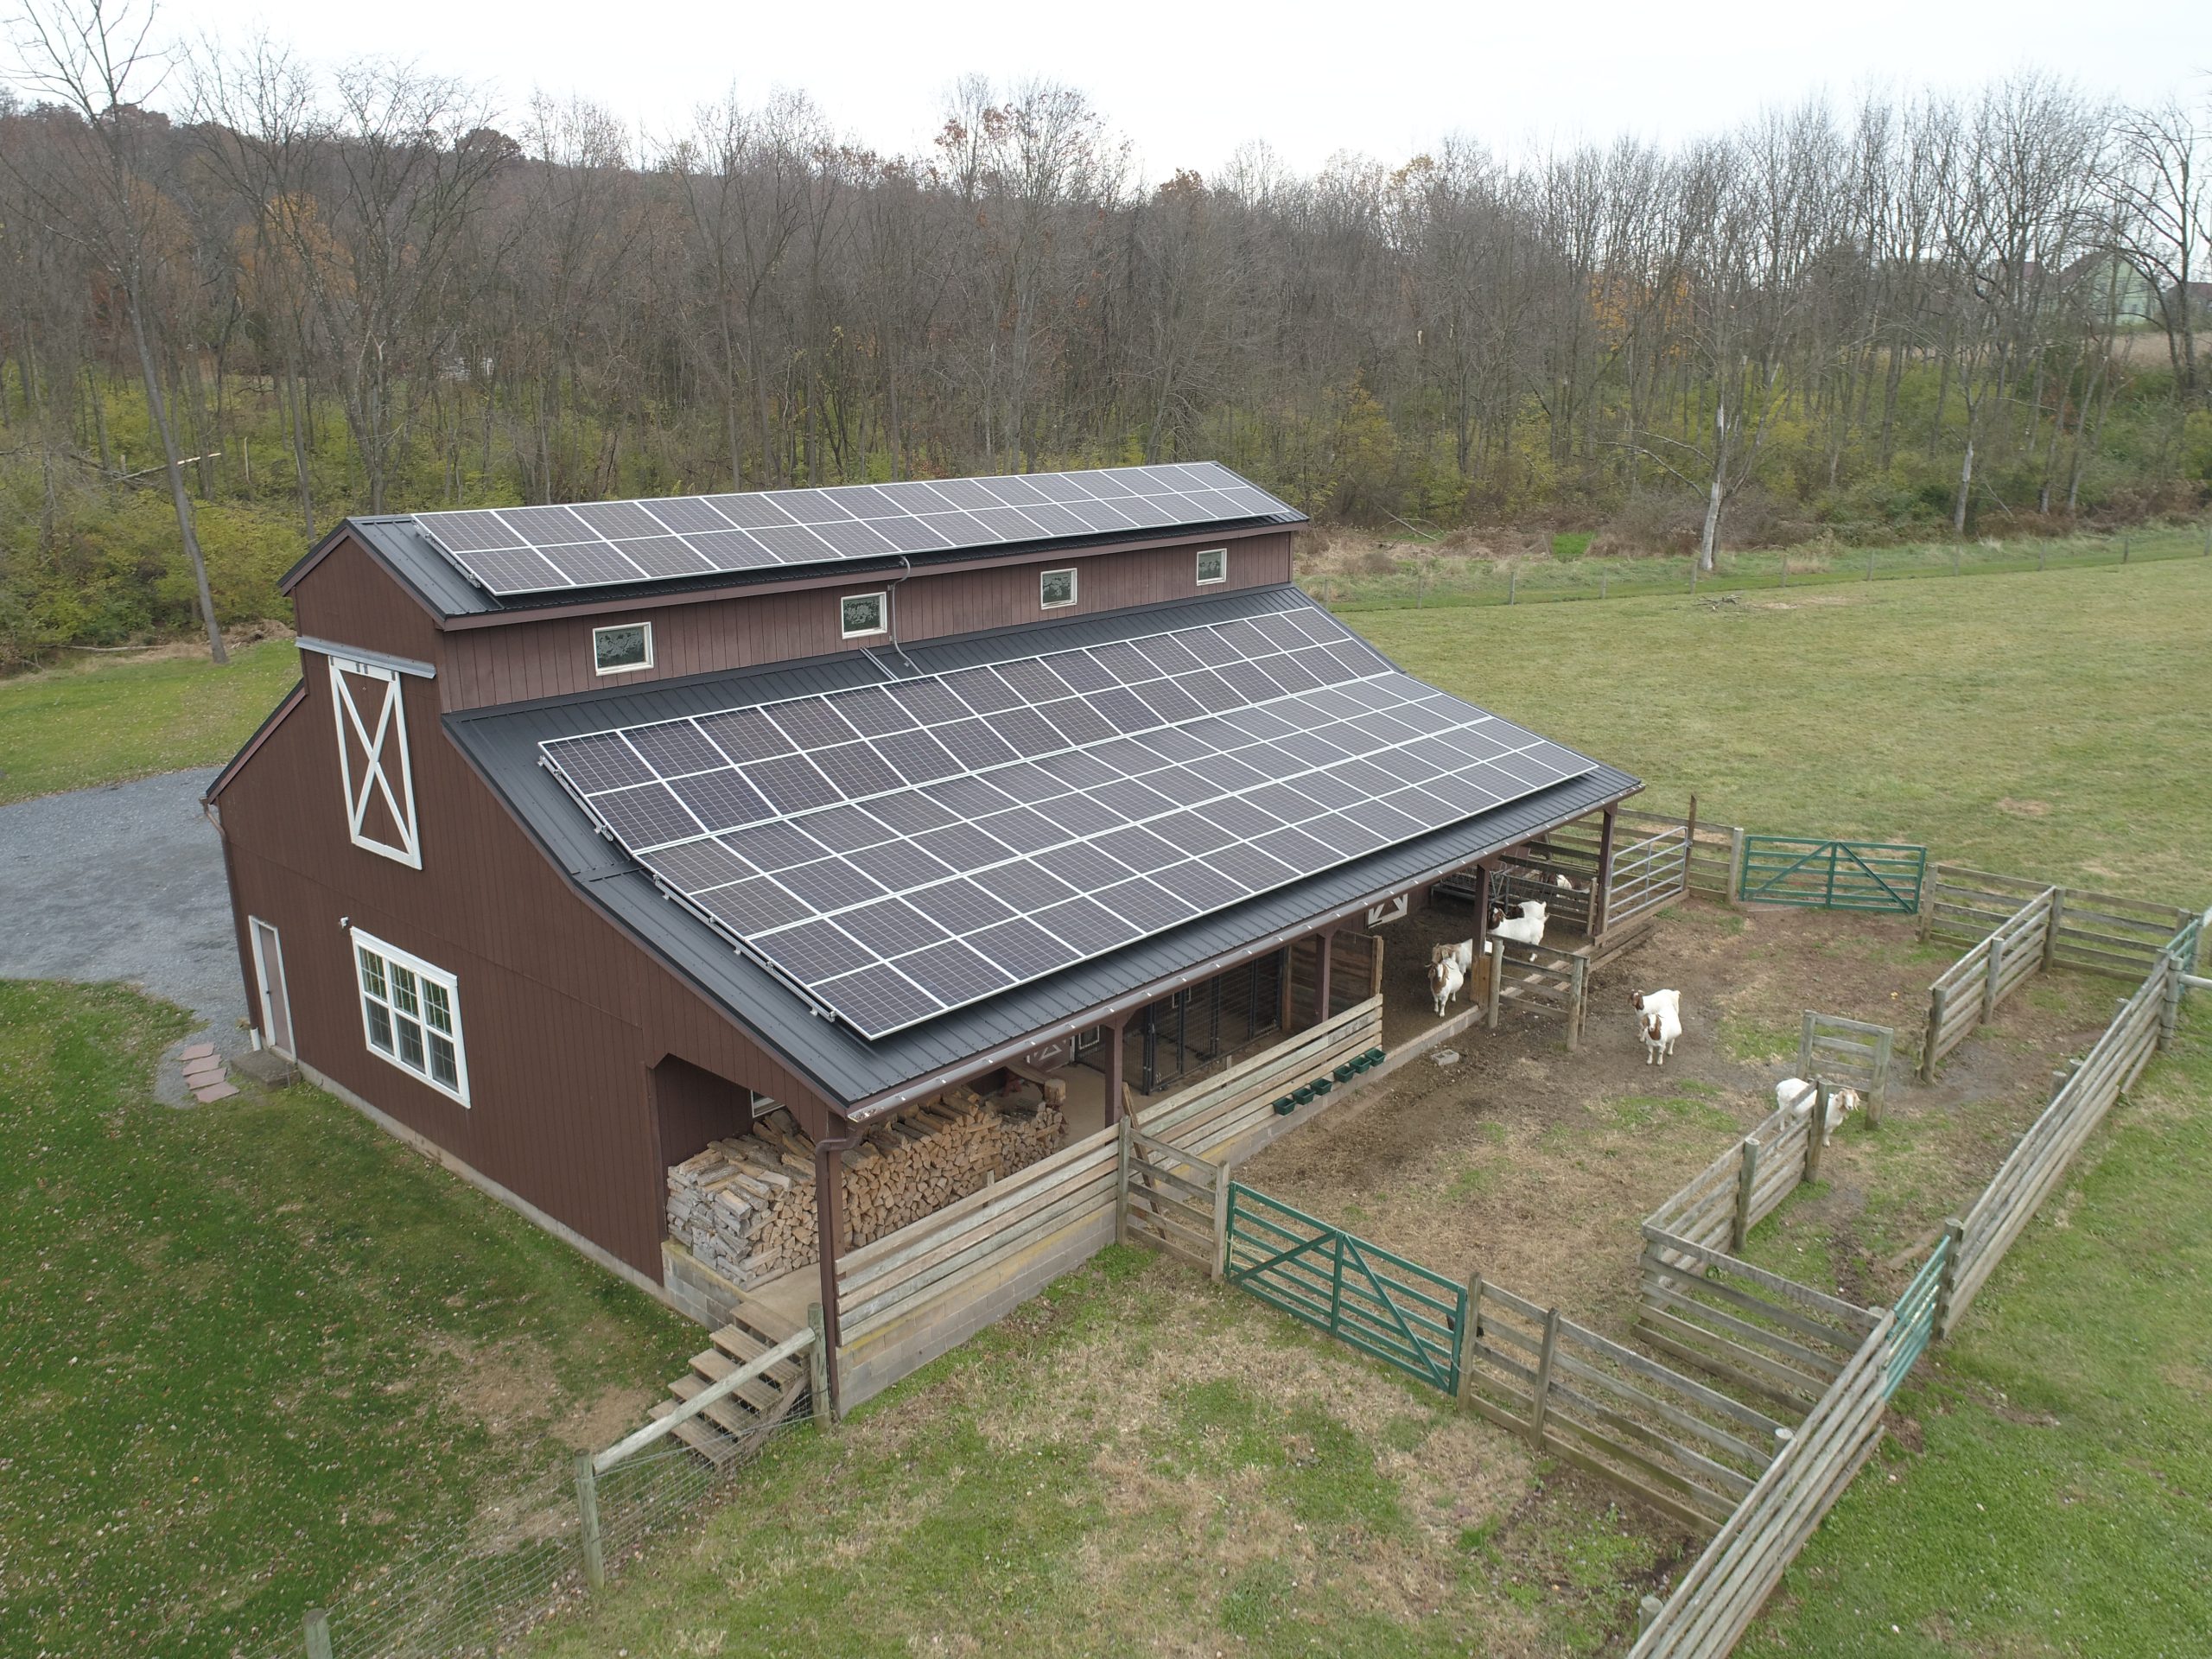 commercial solar systems